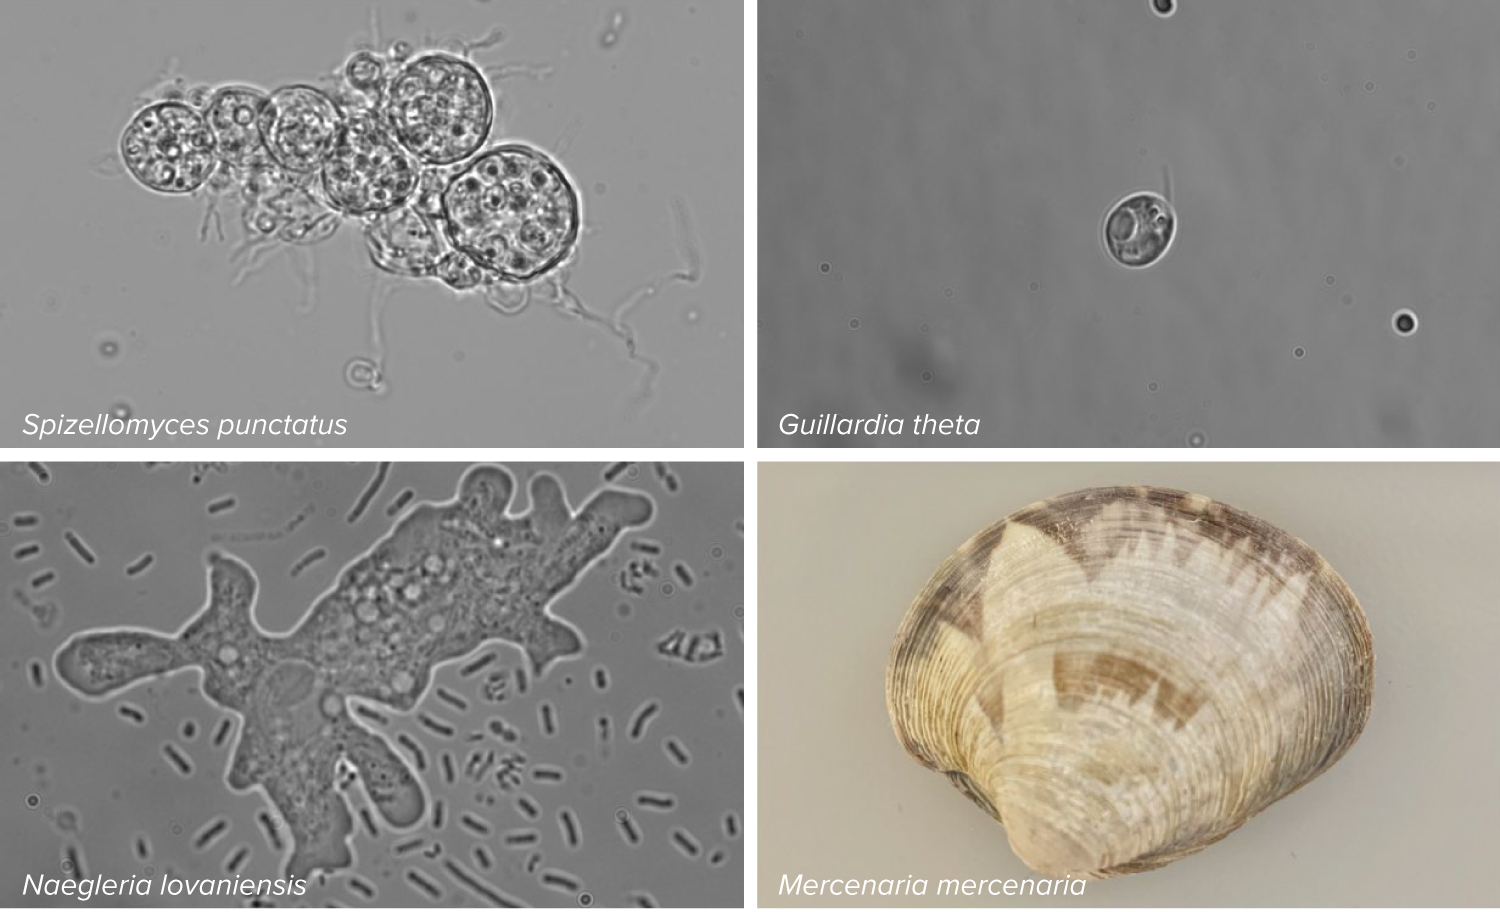 Four pictures arranged in quadrants show three microscopic organisms and a clam.